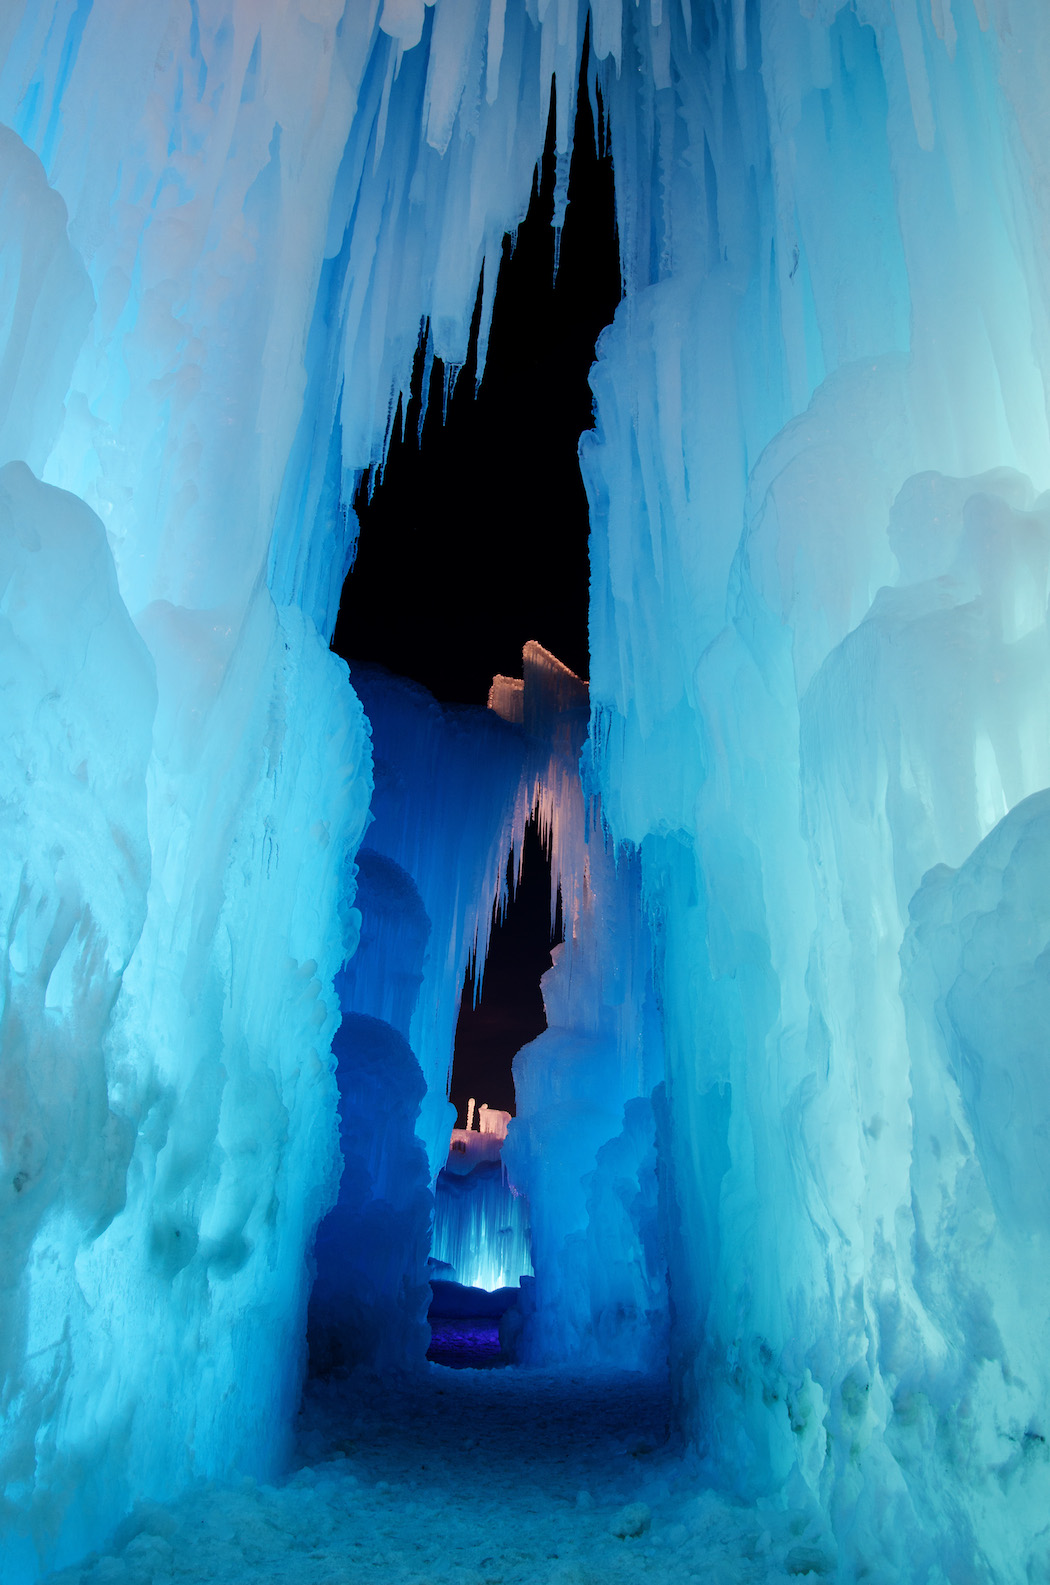 The Midway, Utah Ice Castle features an amazing light show set to music at night.